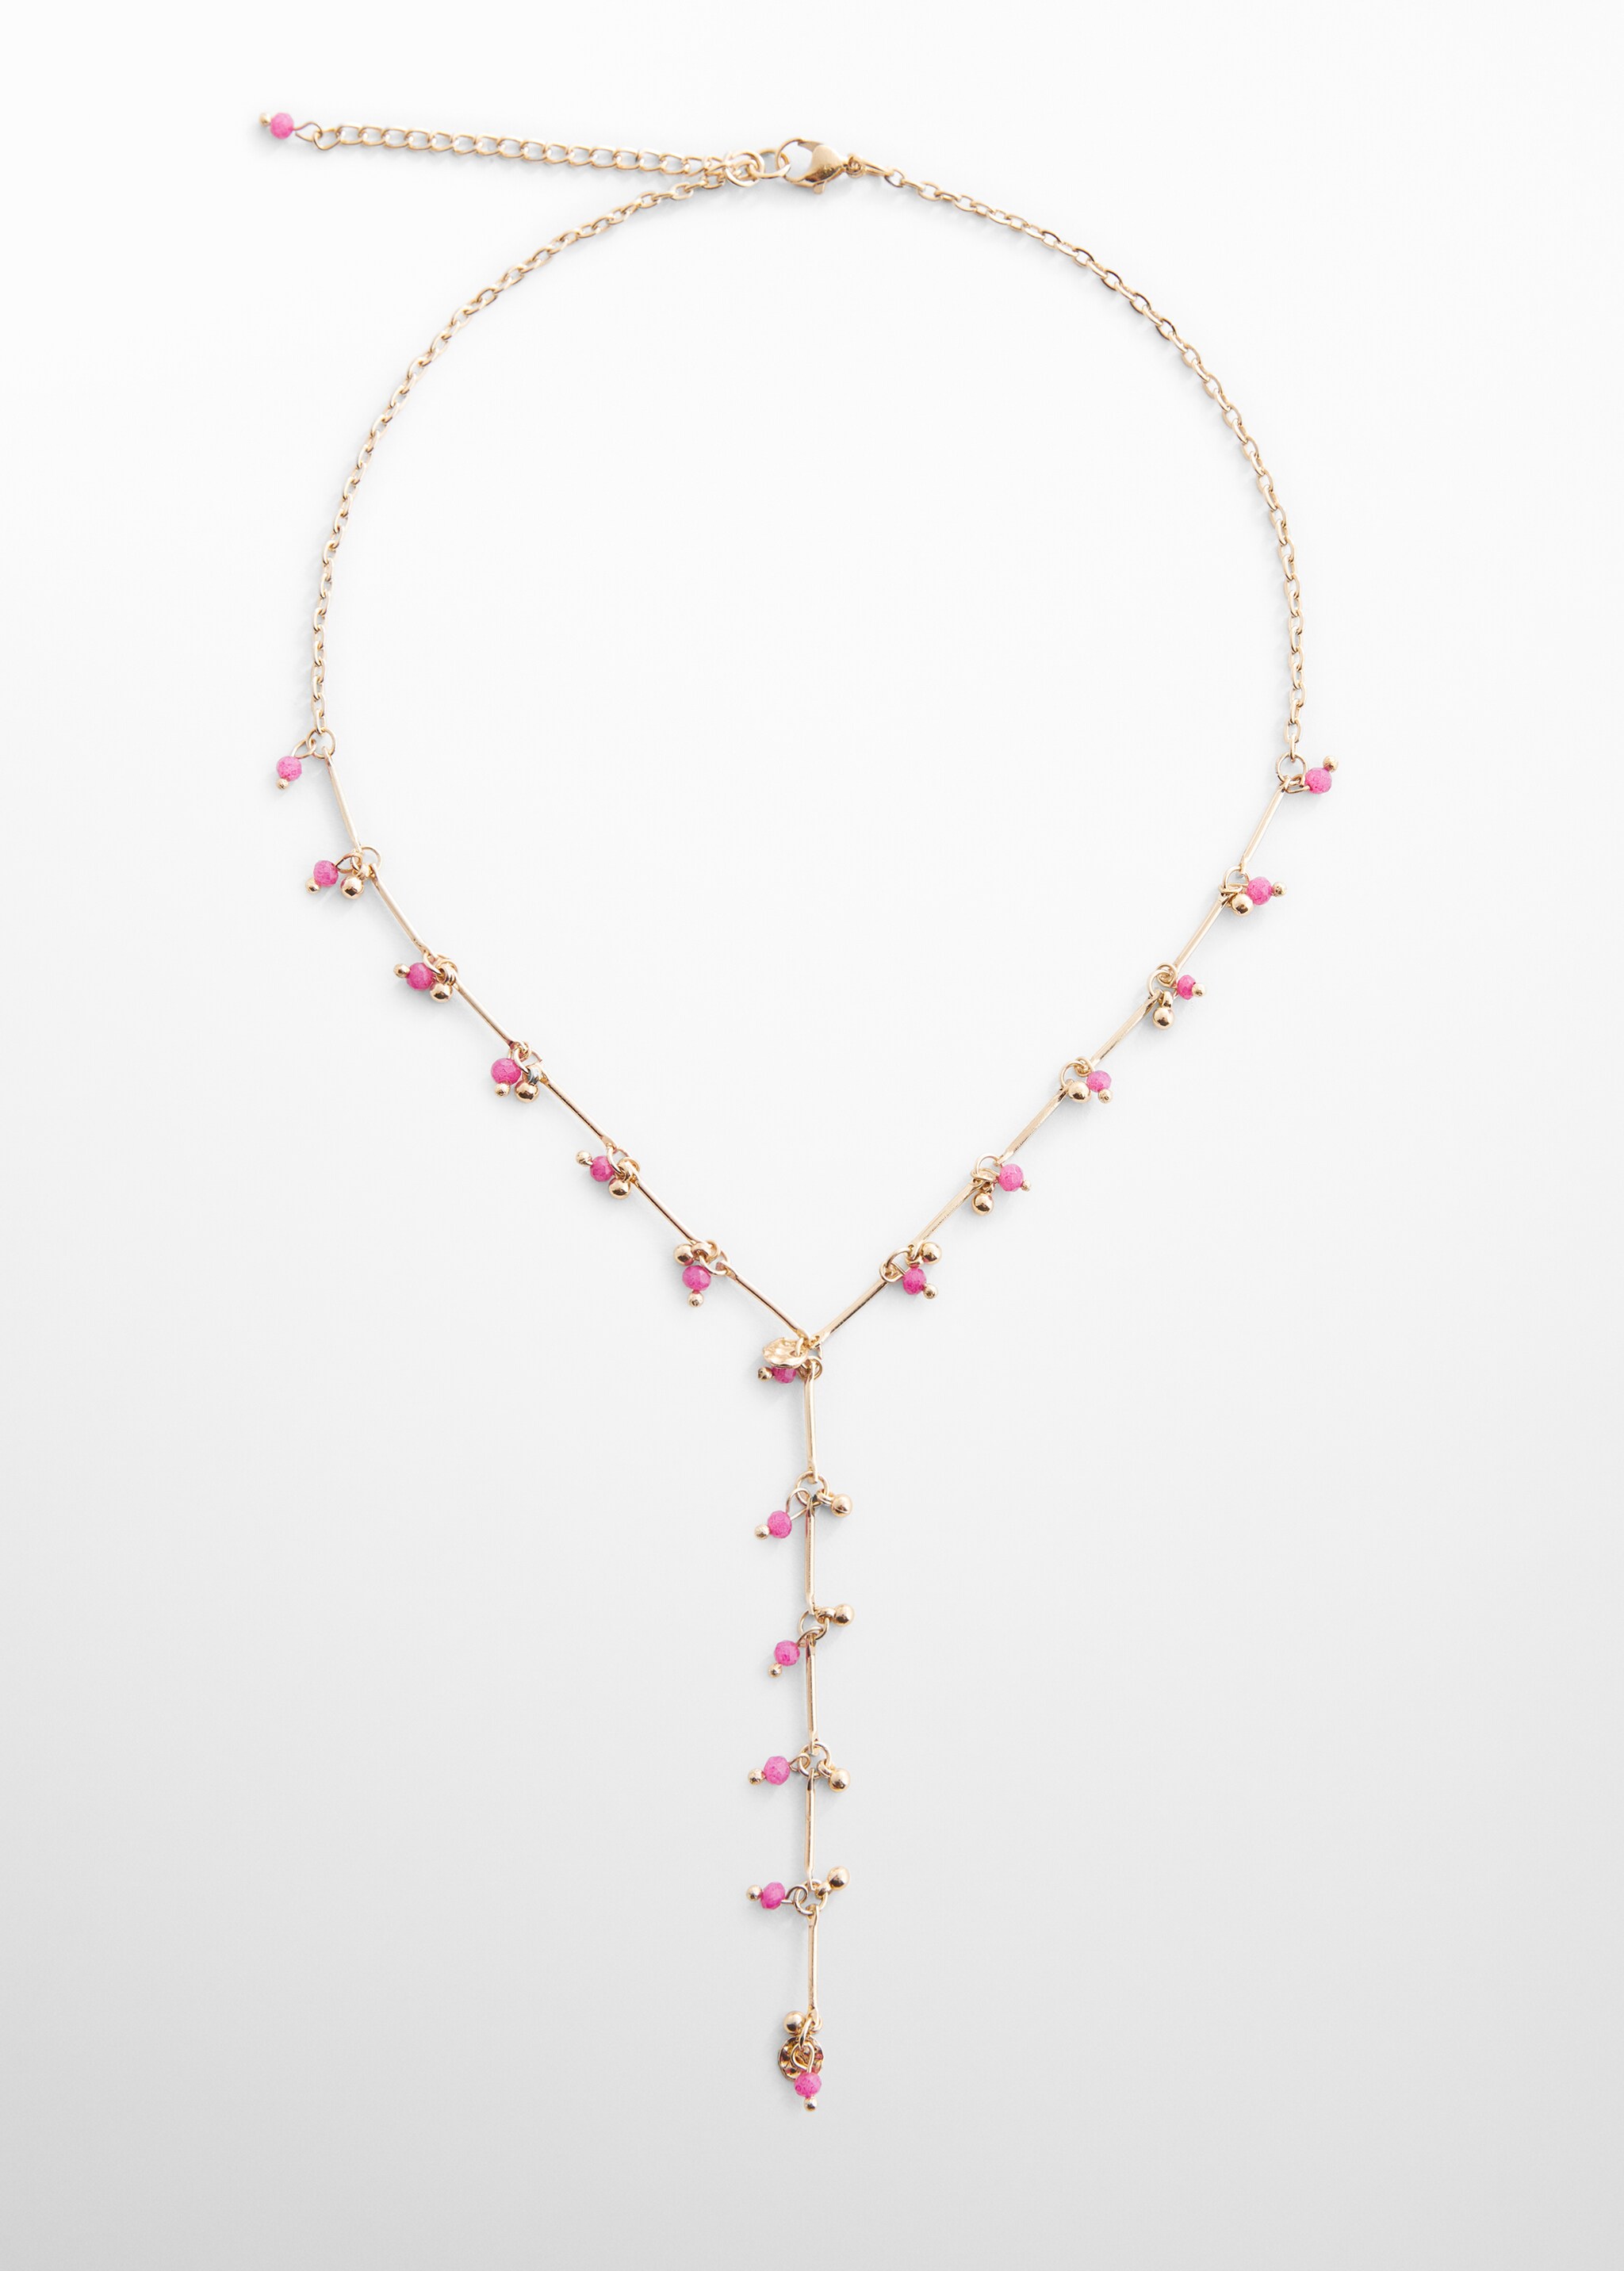 Crystal bead necklace - Article without model